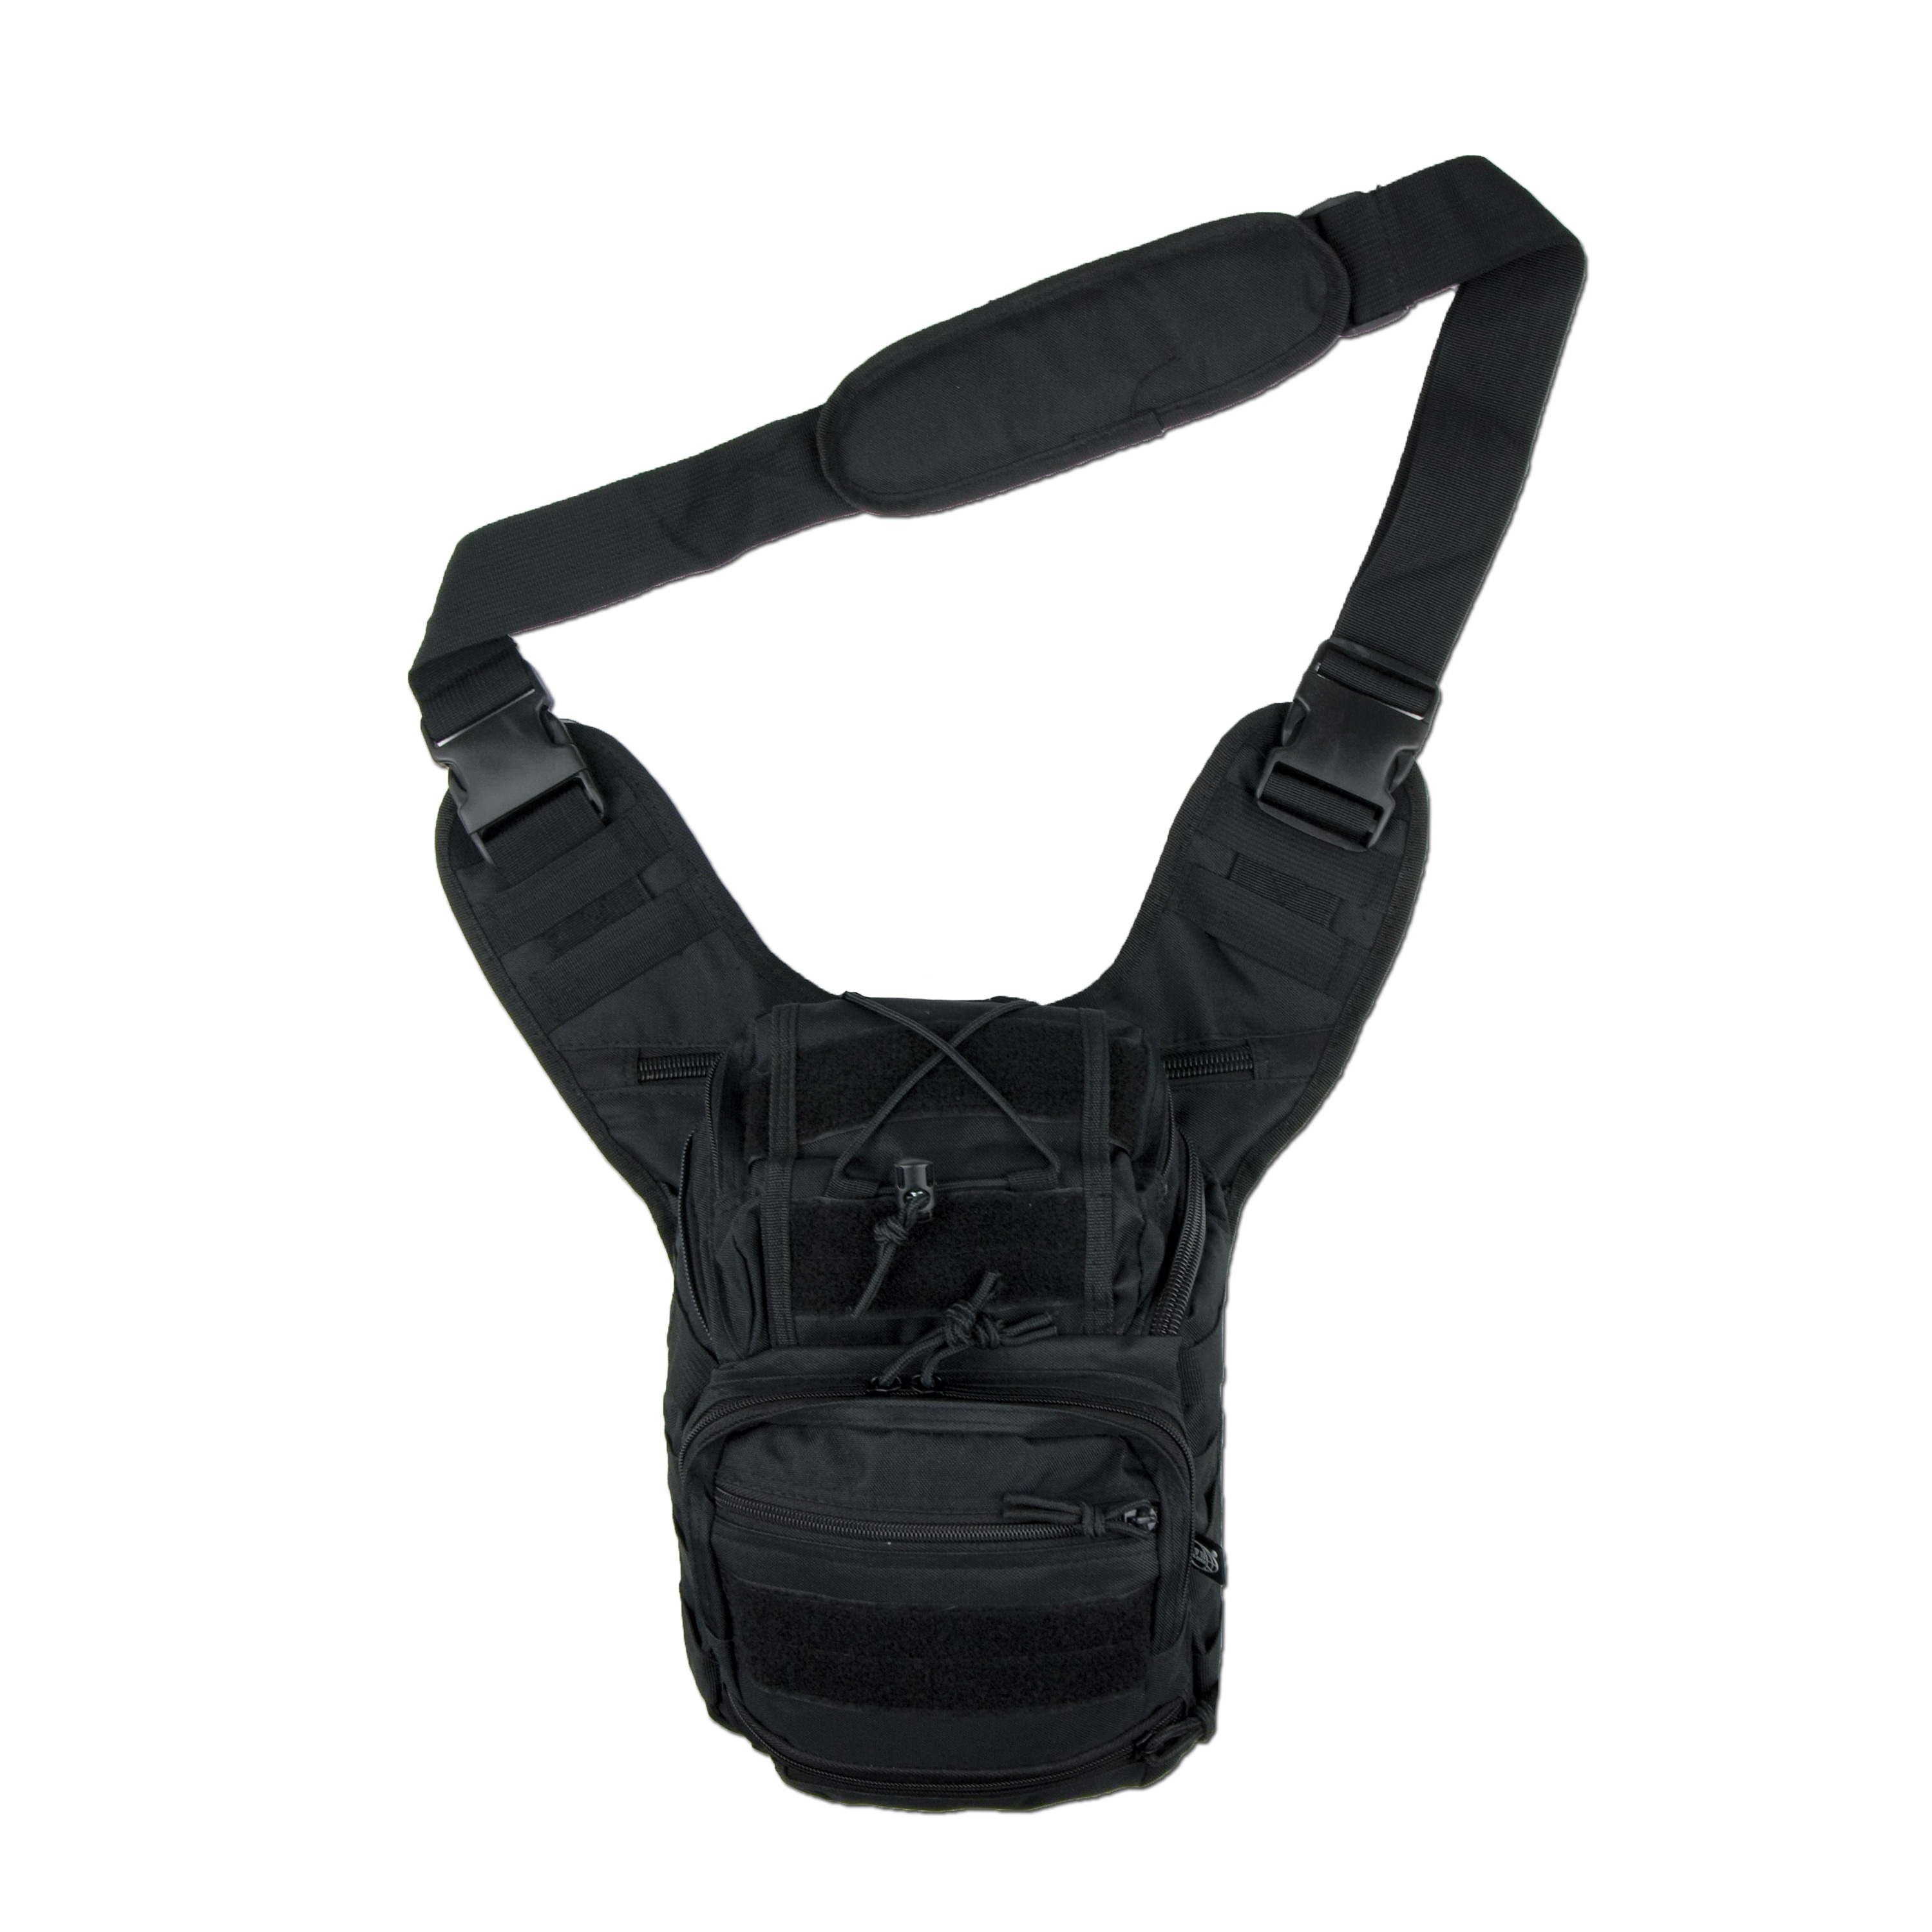 Purchase the MFH Shoulder Bag Deluxe black by ASMC